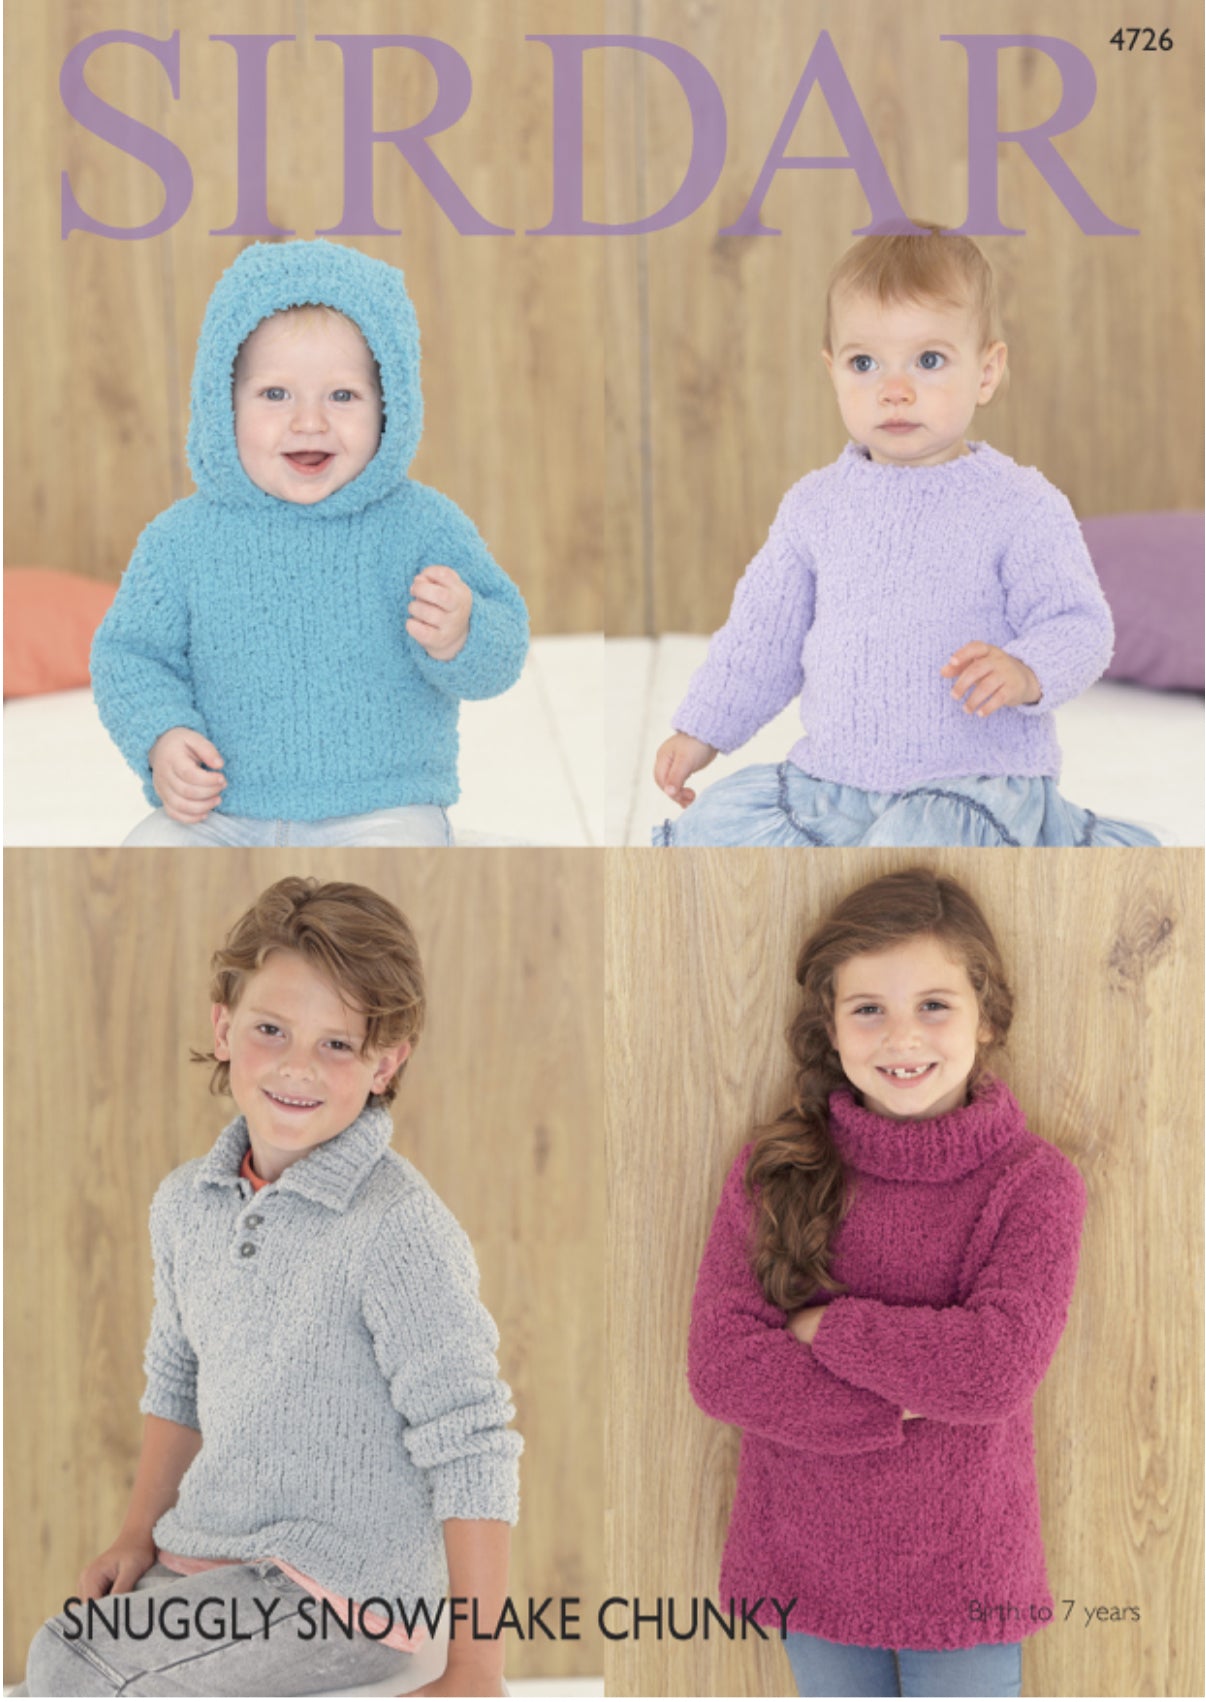 Sirdar 4726 Sweaters in Snuggly Snowflake Chunky